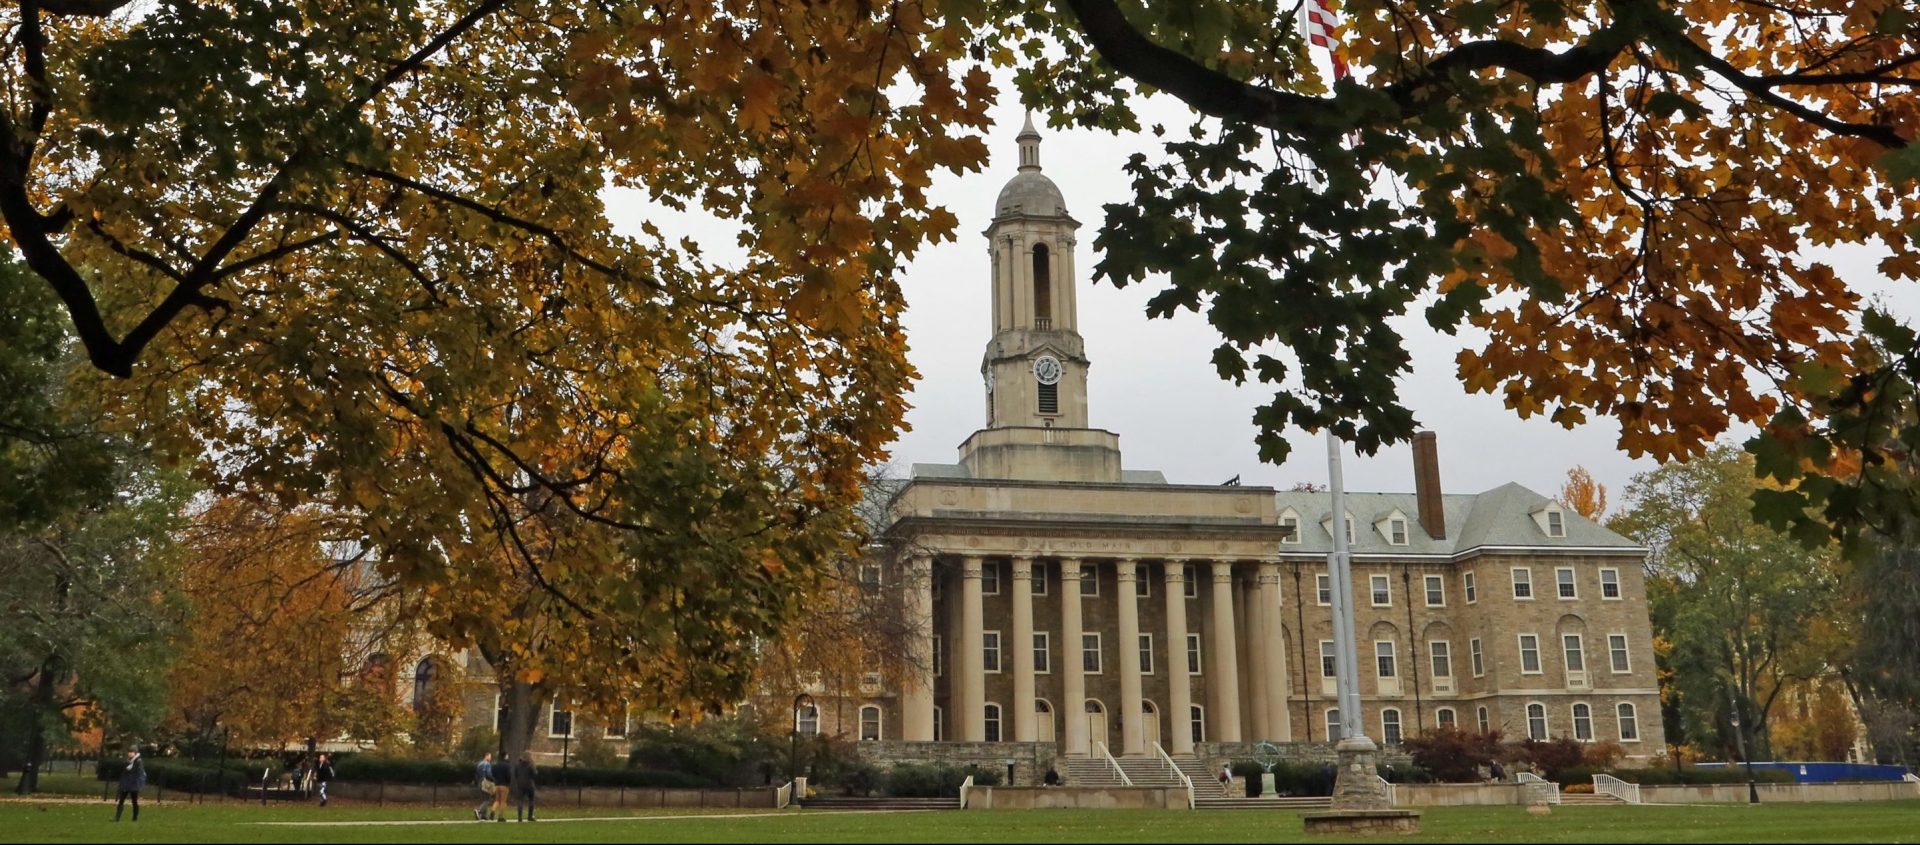 FILE PHOTO: This is Old Main on the Penn State University main campus in State College.